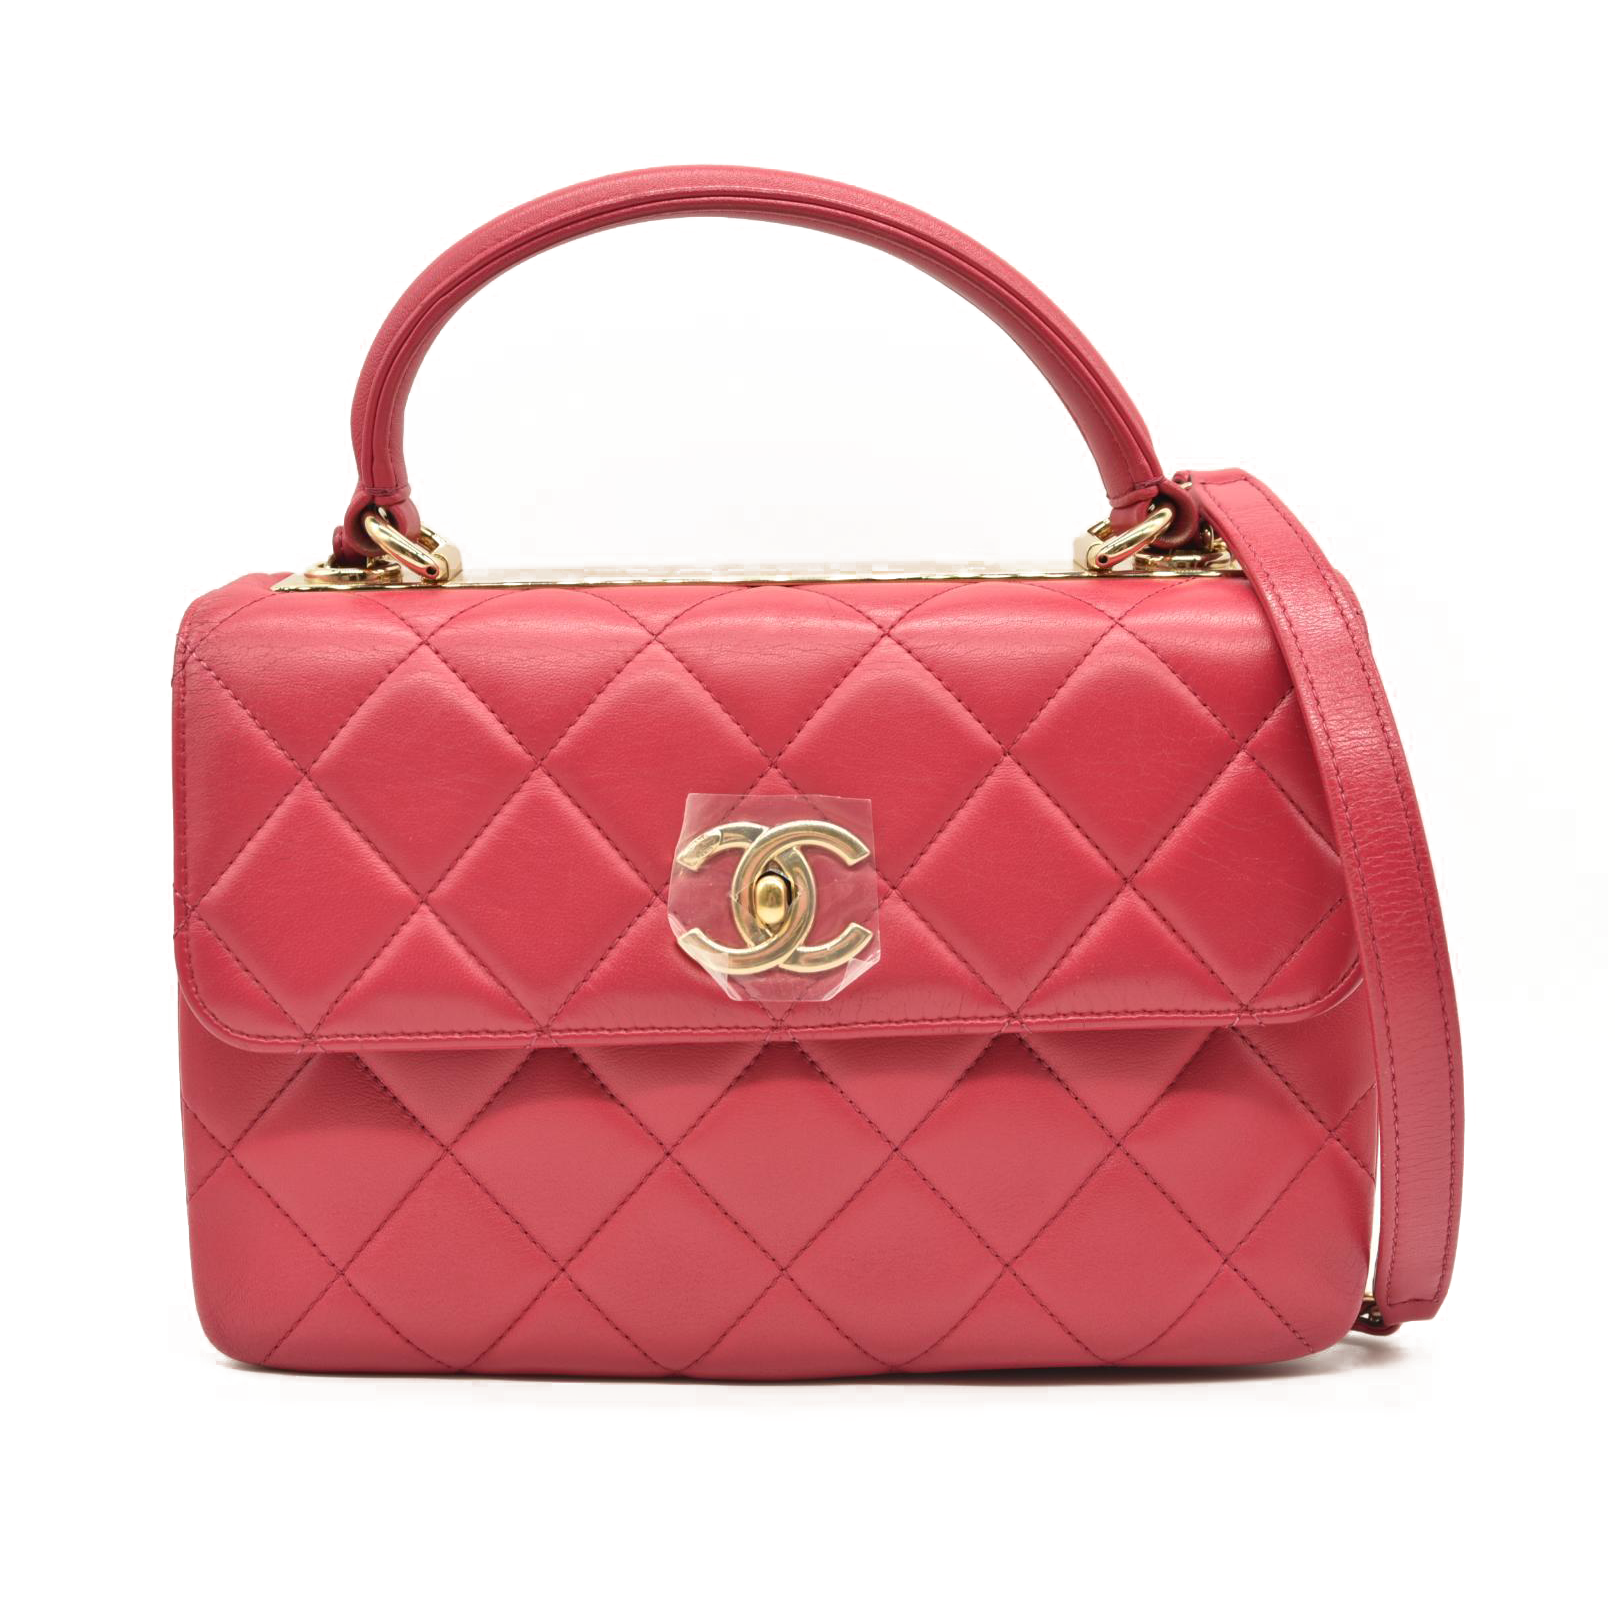 CHANEL Lambskin Quilted Small Trendy CC Flap Dual Handle Bag Pink